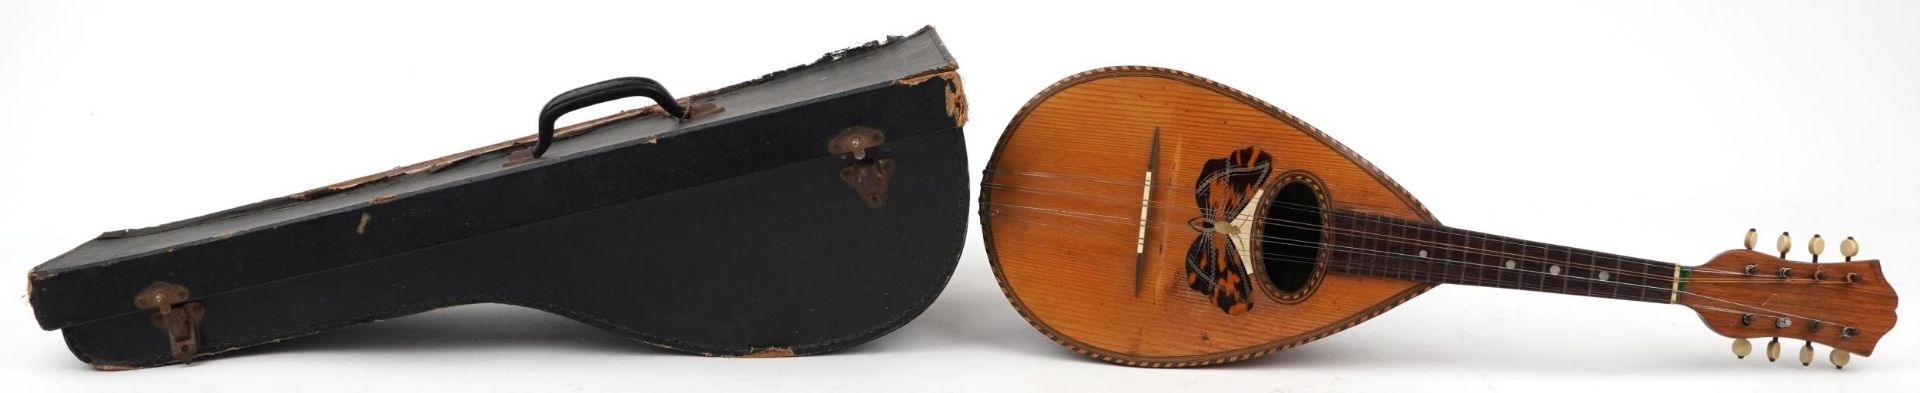 Vintage inlaid melon shaped mandolin with case, Alfredo Albertini paper label to the interior, - Image 2 of 5